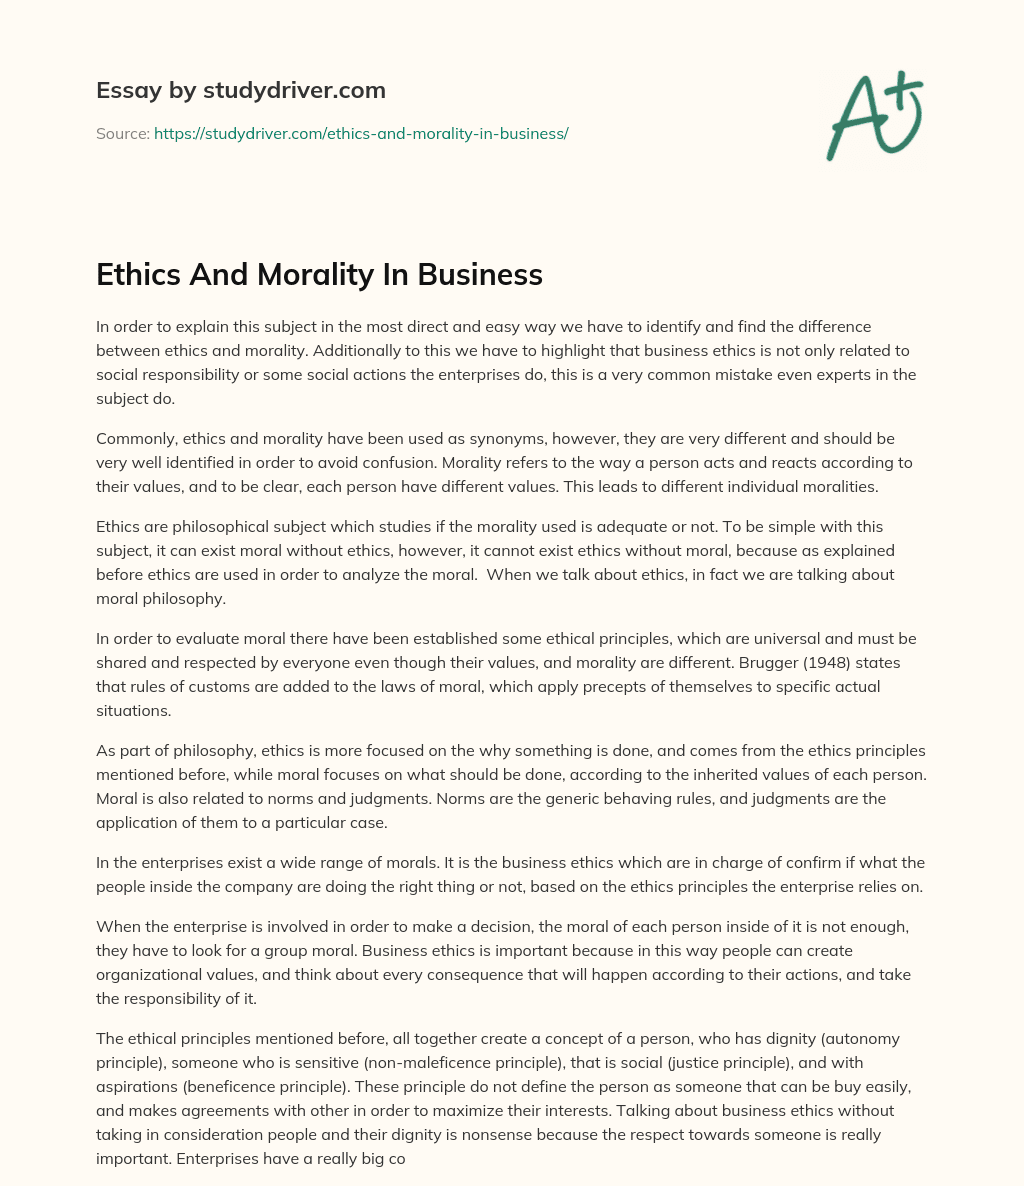 Ethics and Morality in Business essay